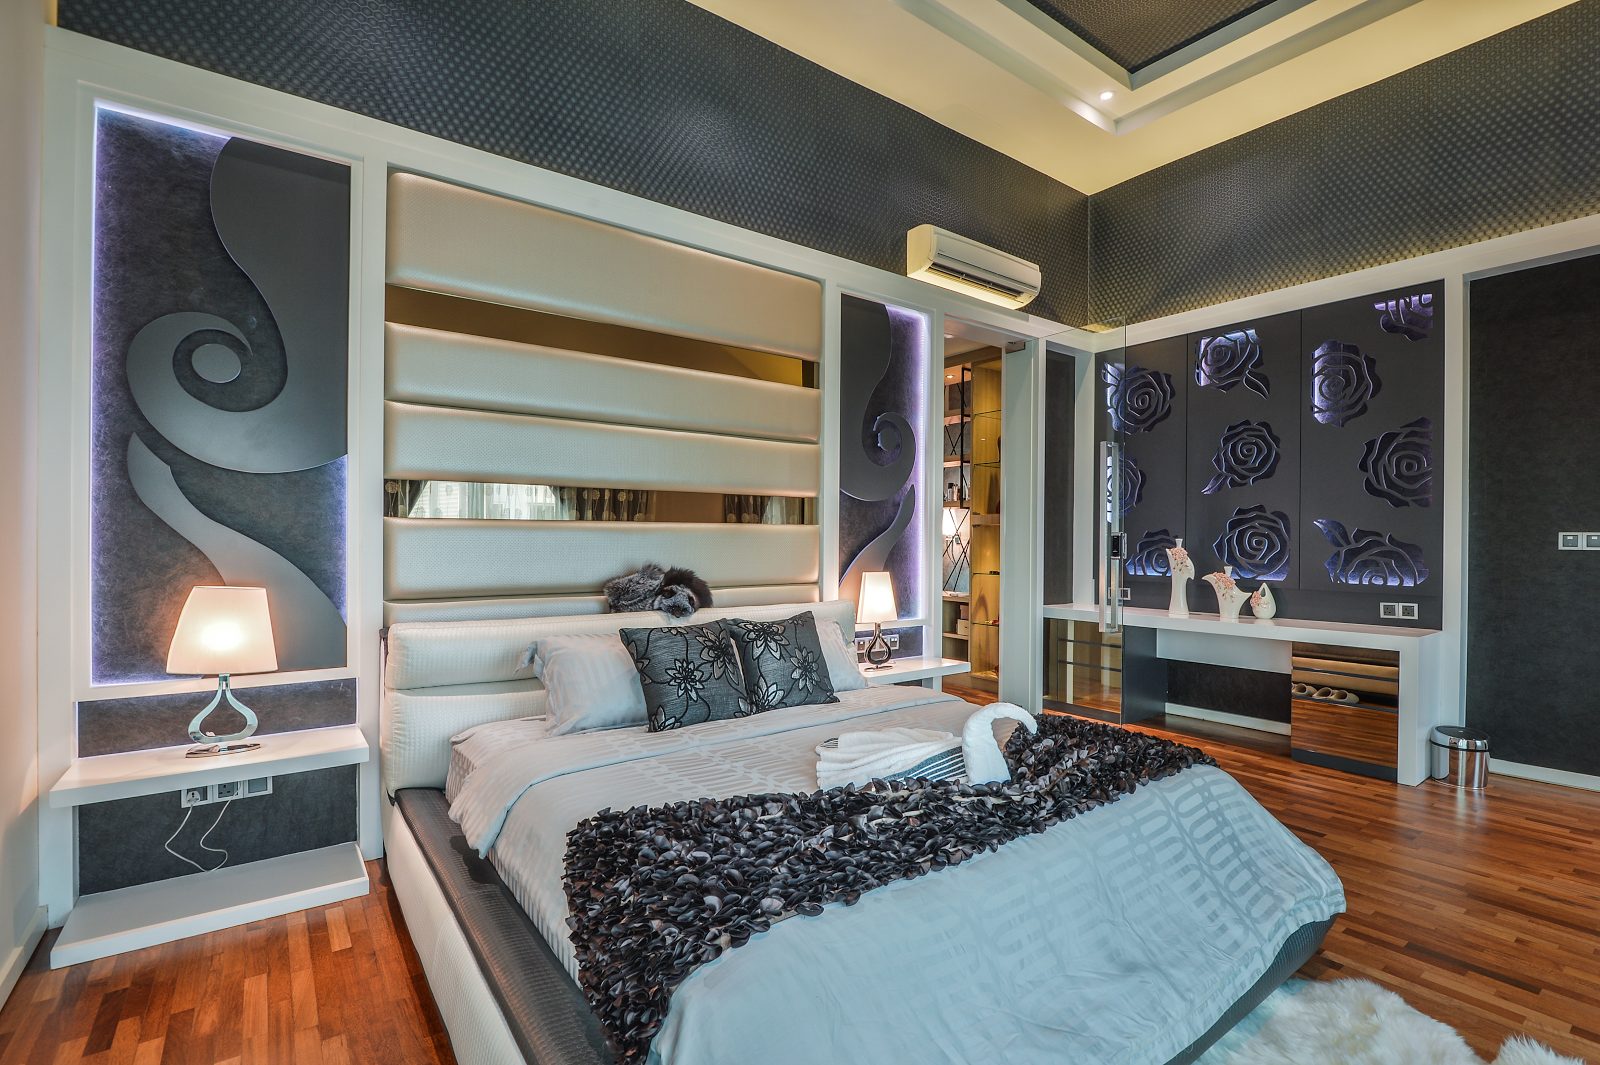 Modern bedroom with floral accents in this semi-detached house in Cheras, Kuala Lumpur